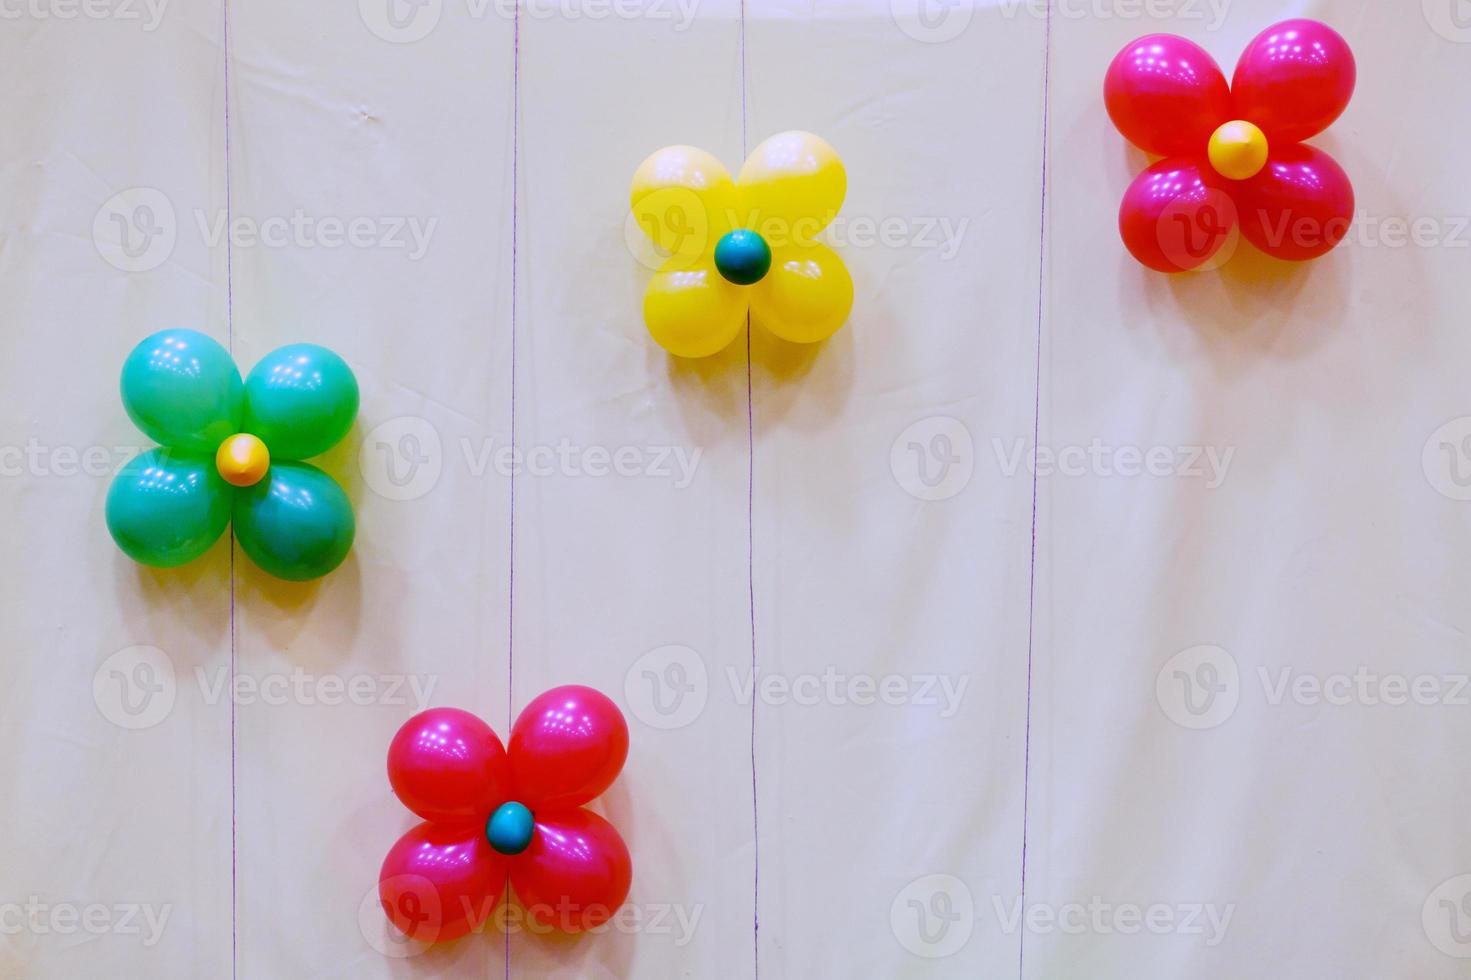 Balloons and colorful balloons with happy celebration party background photo